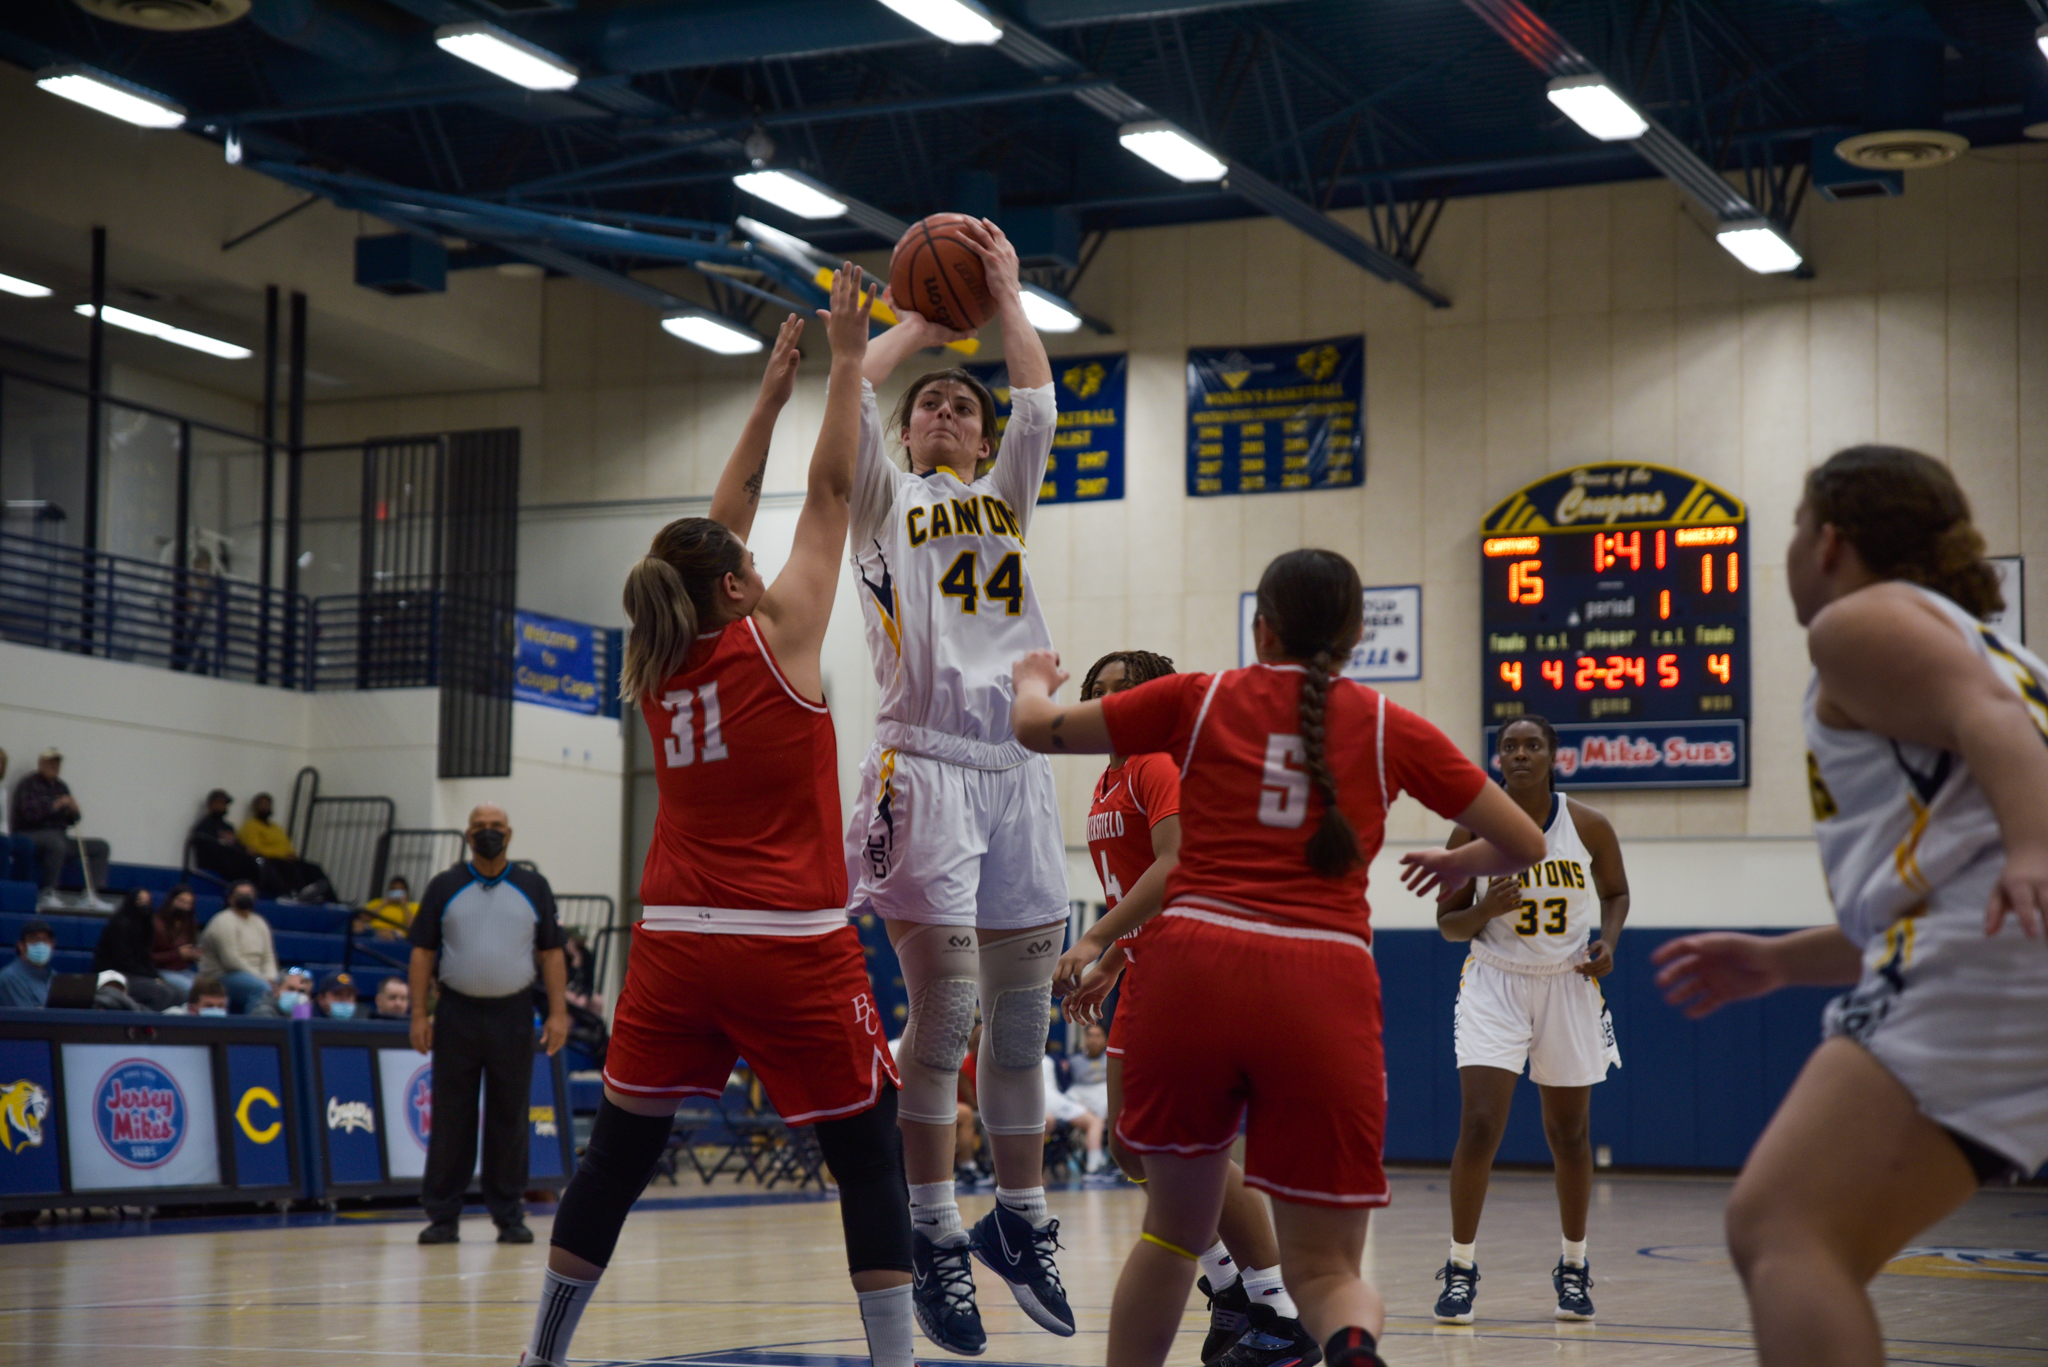 College of the Canyons women's basketball student-athlete LuLu Salloom.